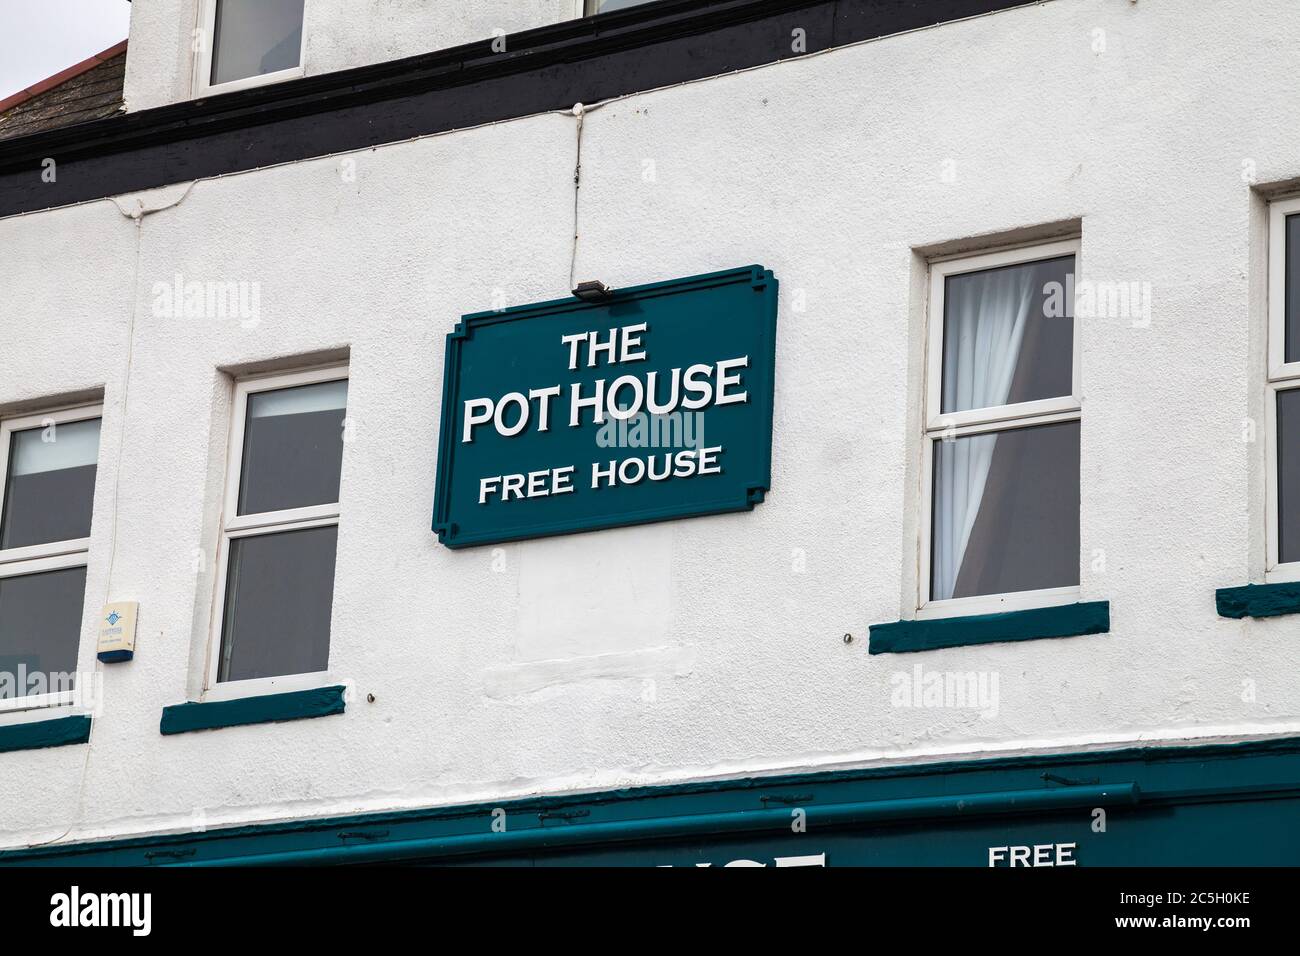 The sign for the Pot House pub at the Headland,Old Hartlepool,England,UK Stock Photo